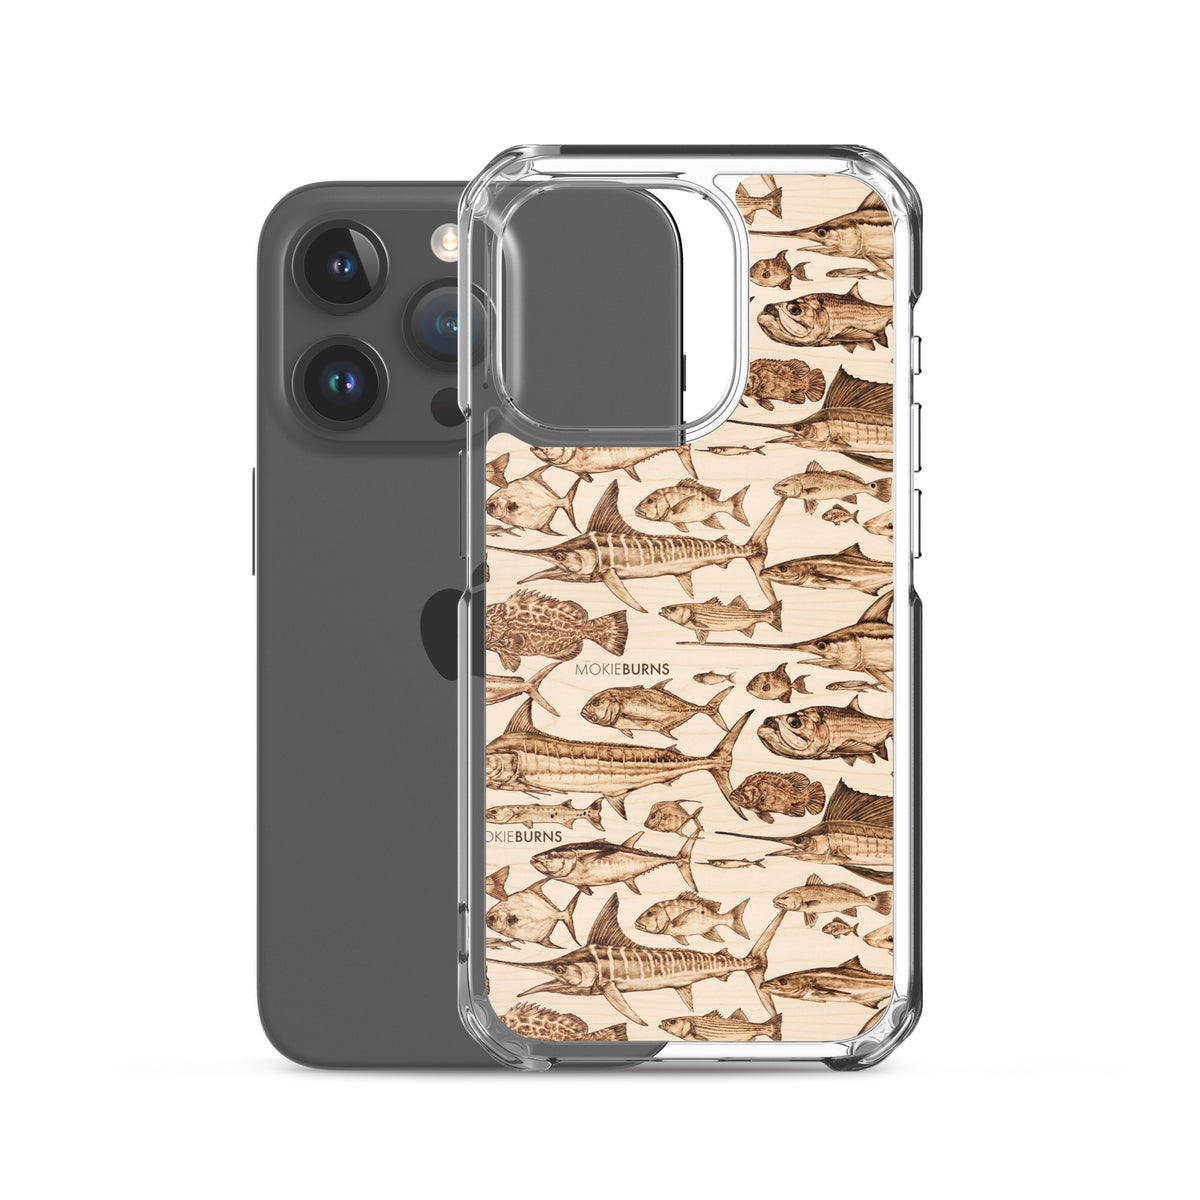 &quot;30 Fish in 30 Days&quot; - iPhone Case [all sizes] - FREE SHIPPING